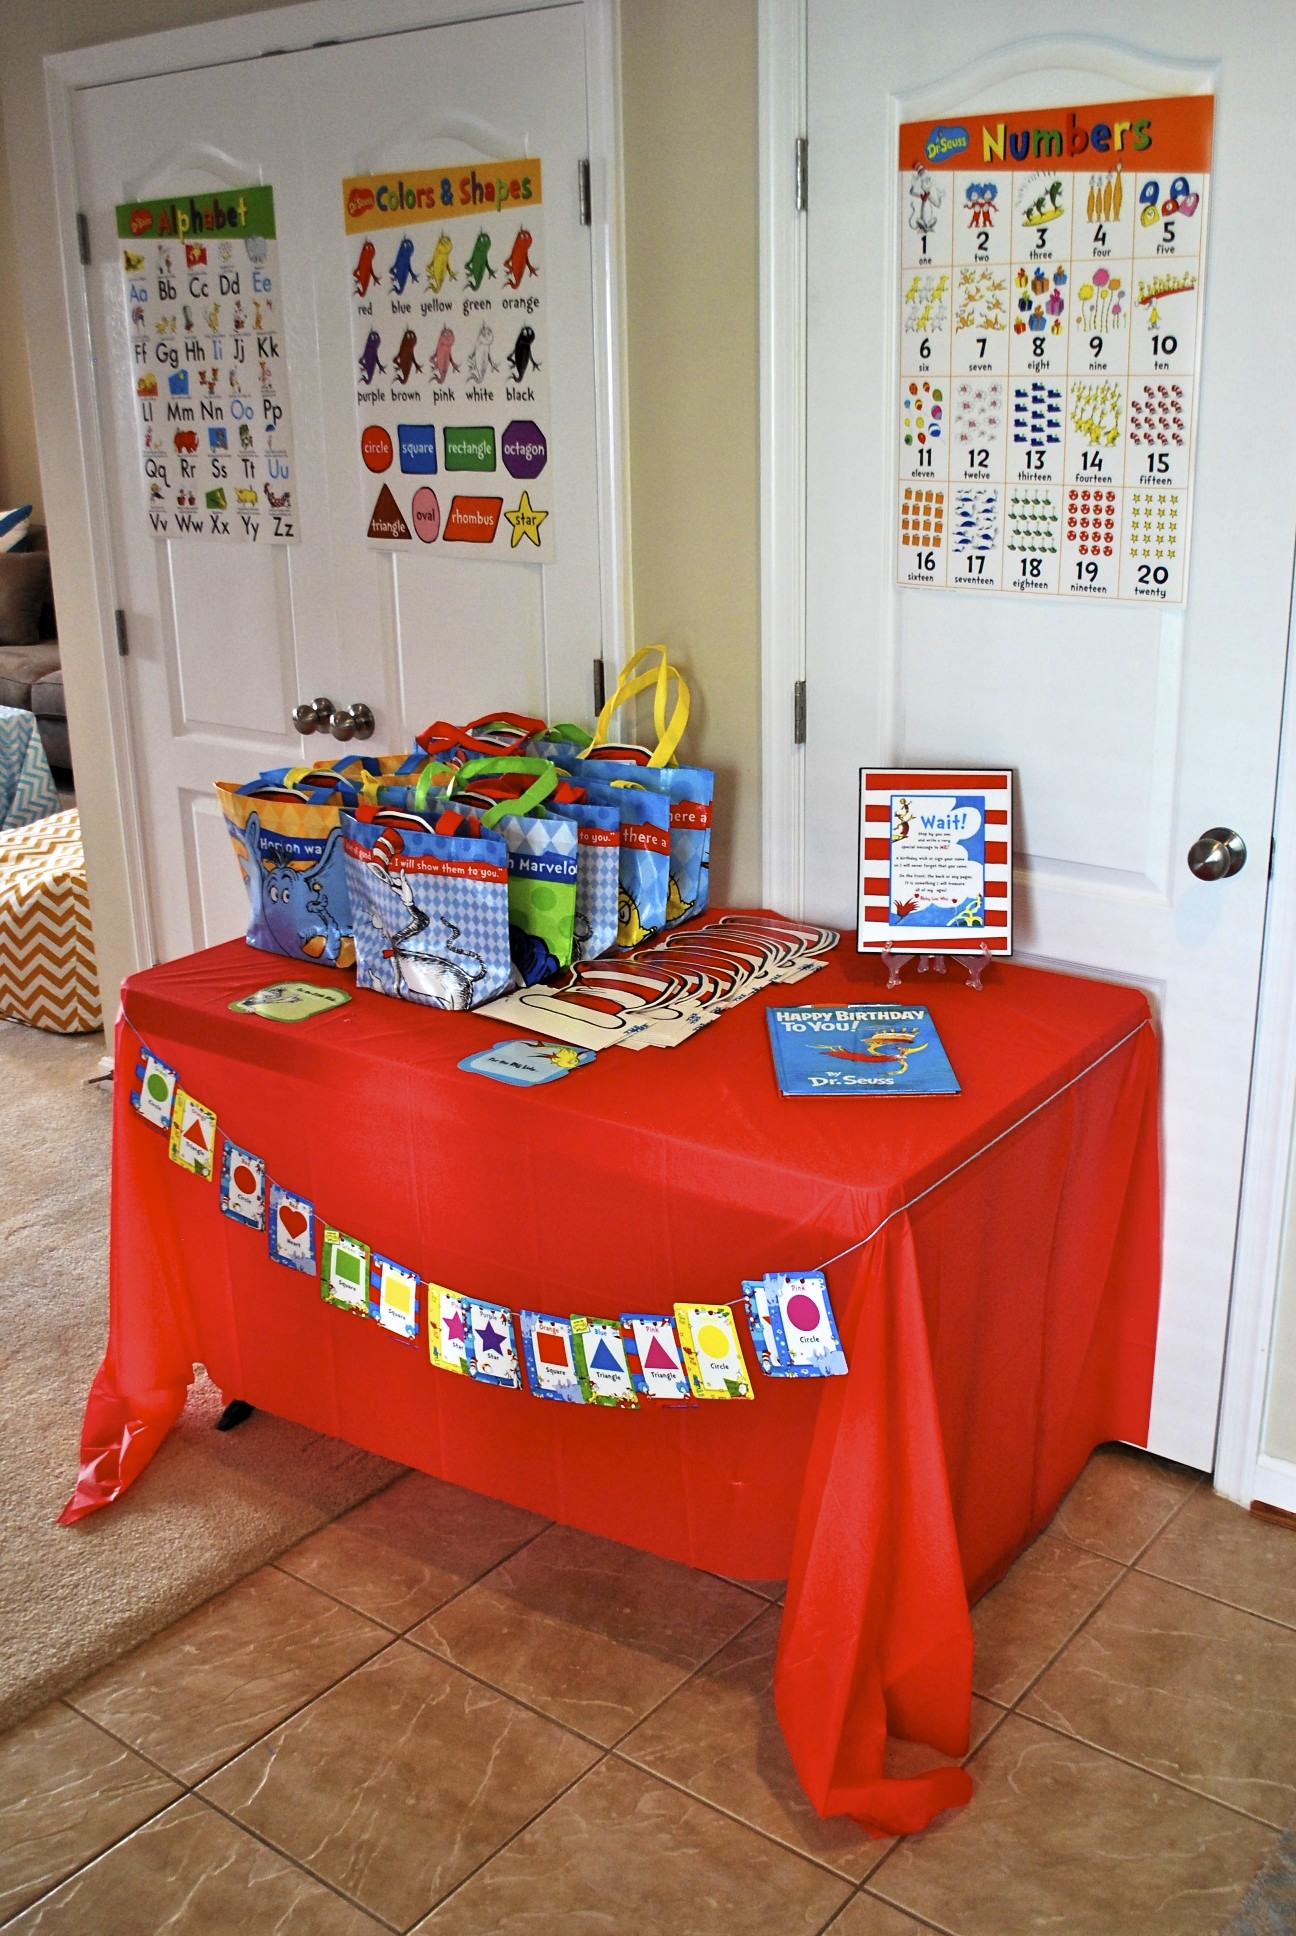 Dr. Seuss Welcome Table